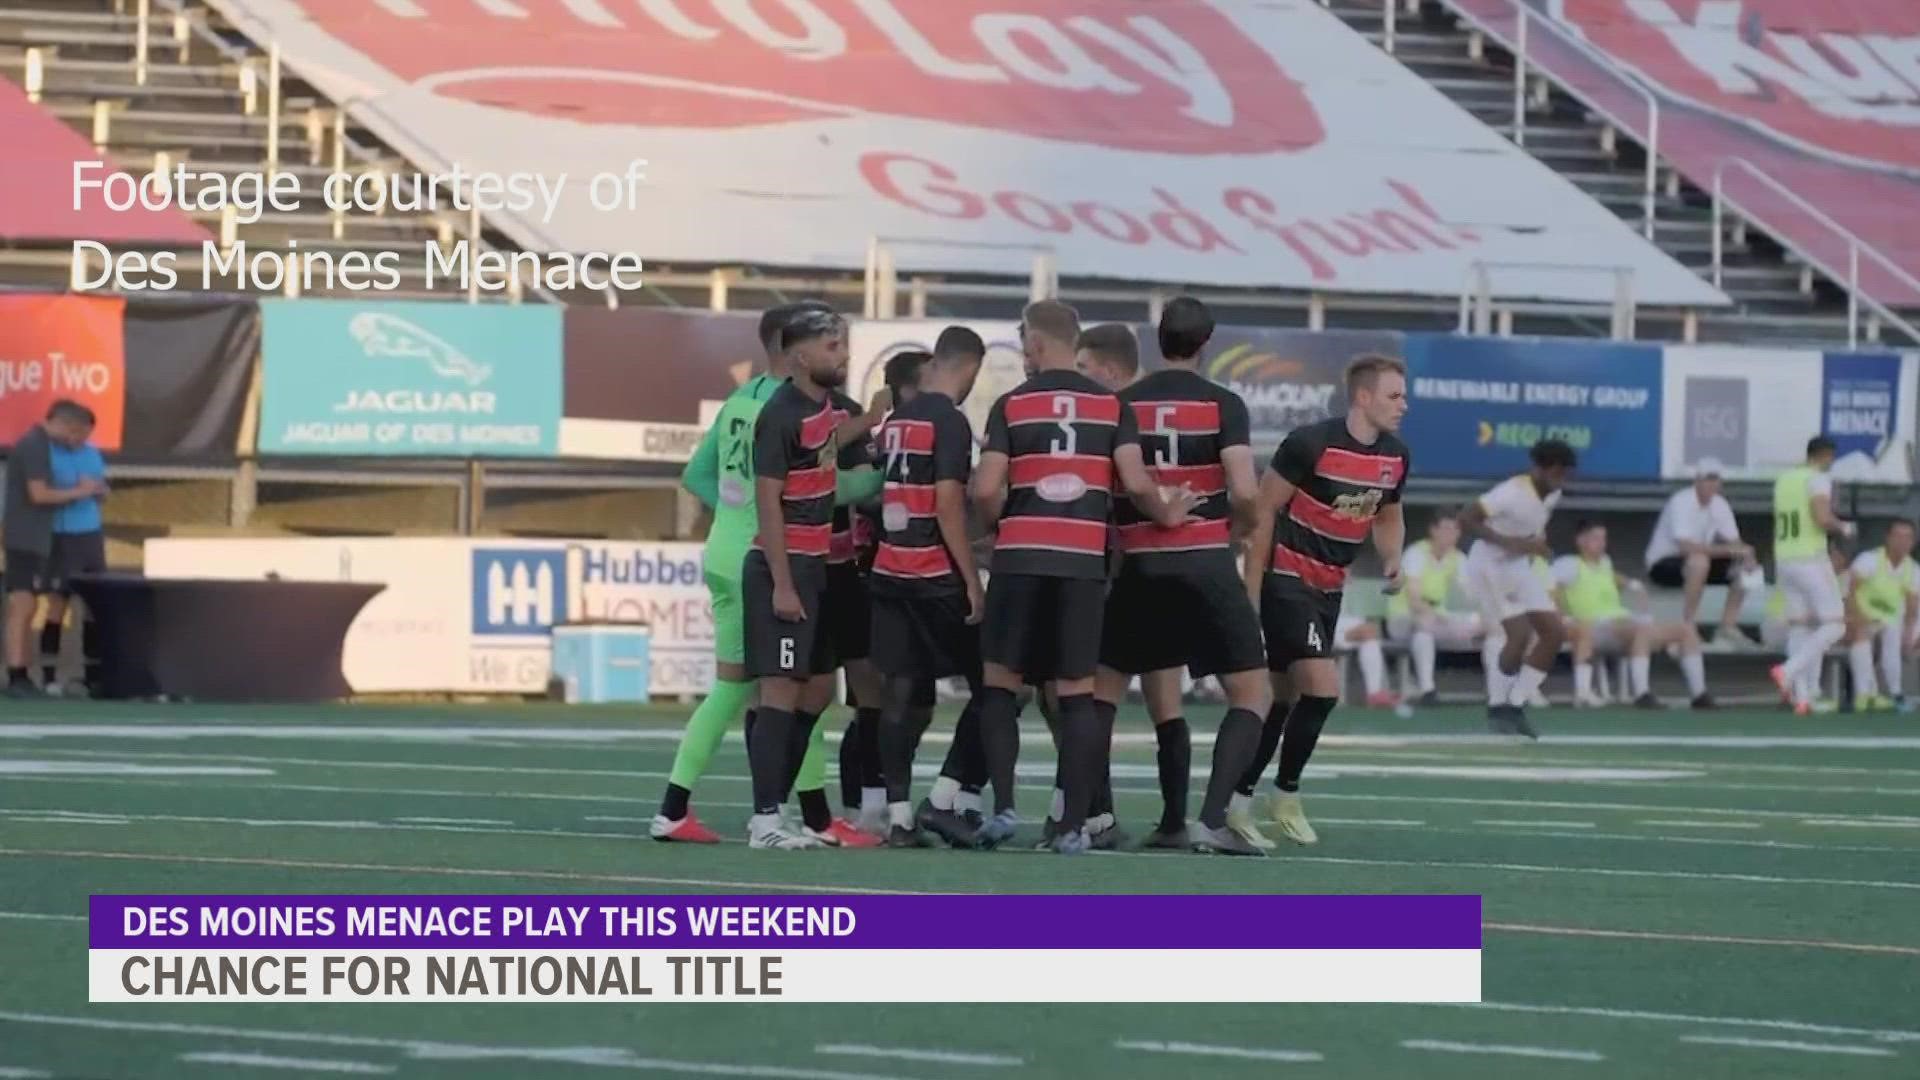 Whatever team wins the game will become the national champions of the USL League 2.